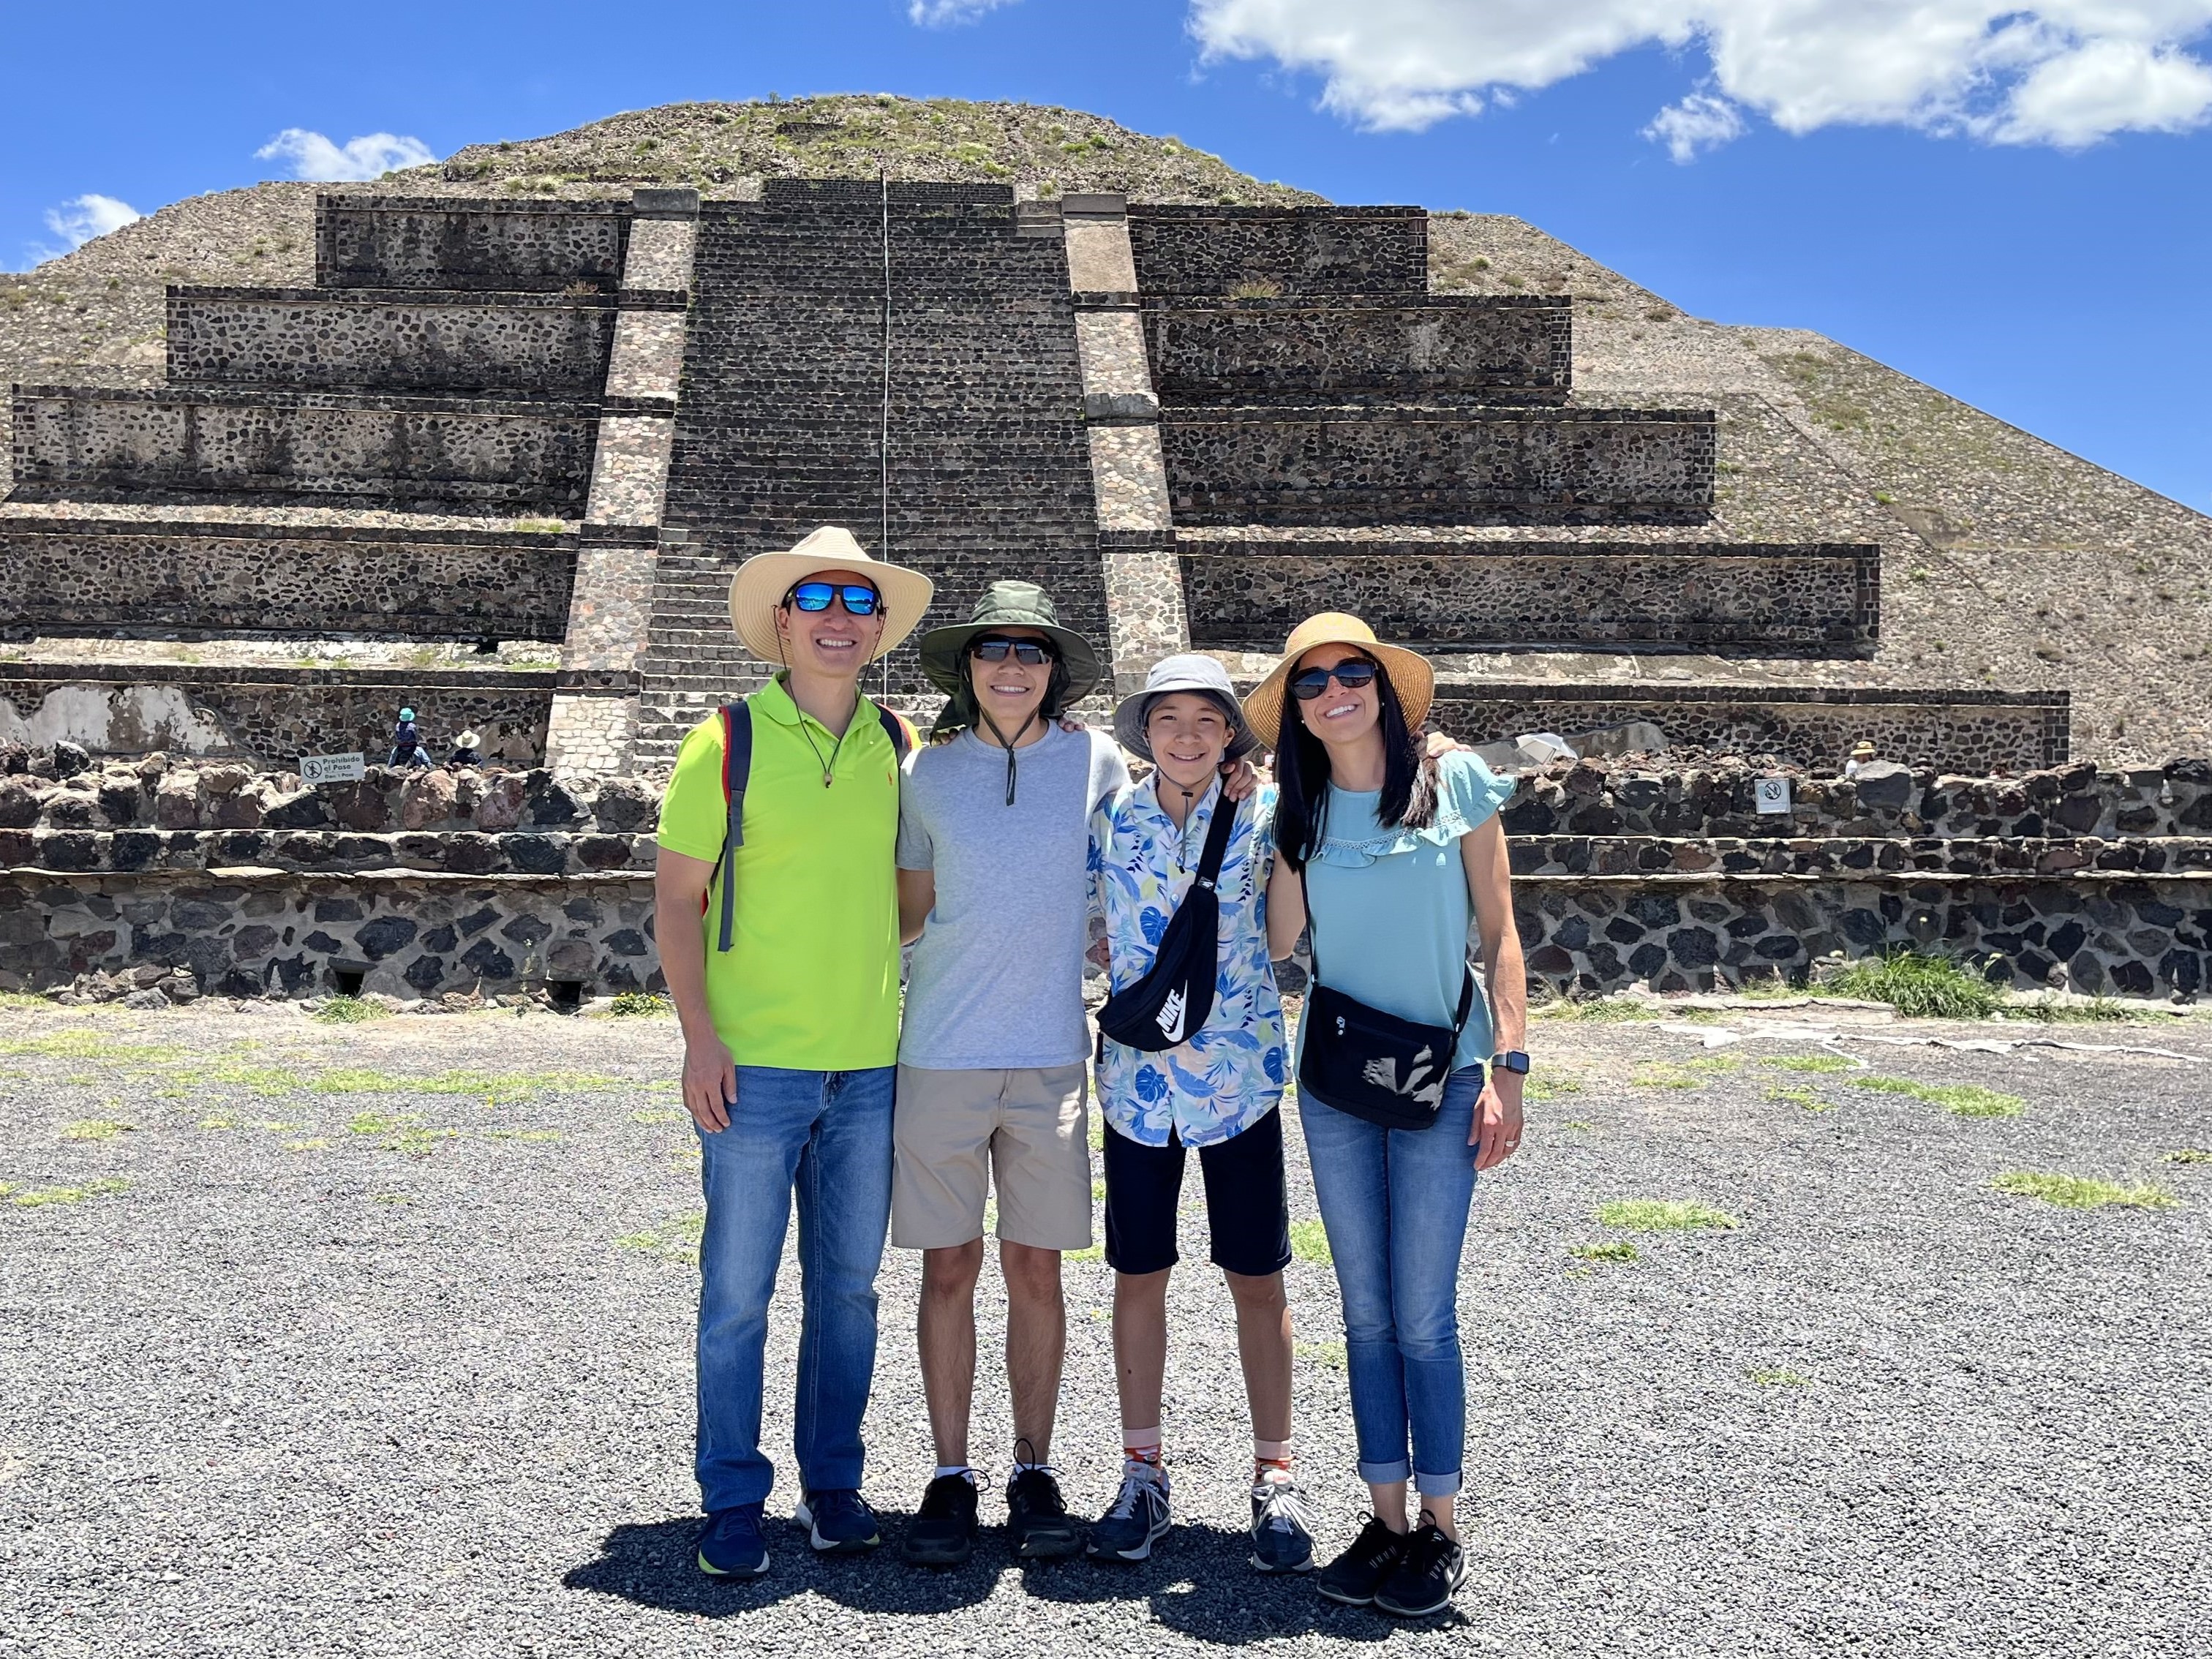 Nobuhiko and his family in front of a Mexican pyramid